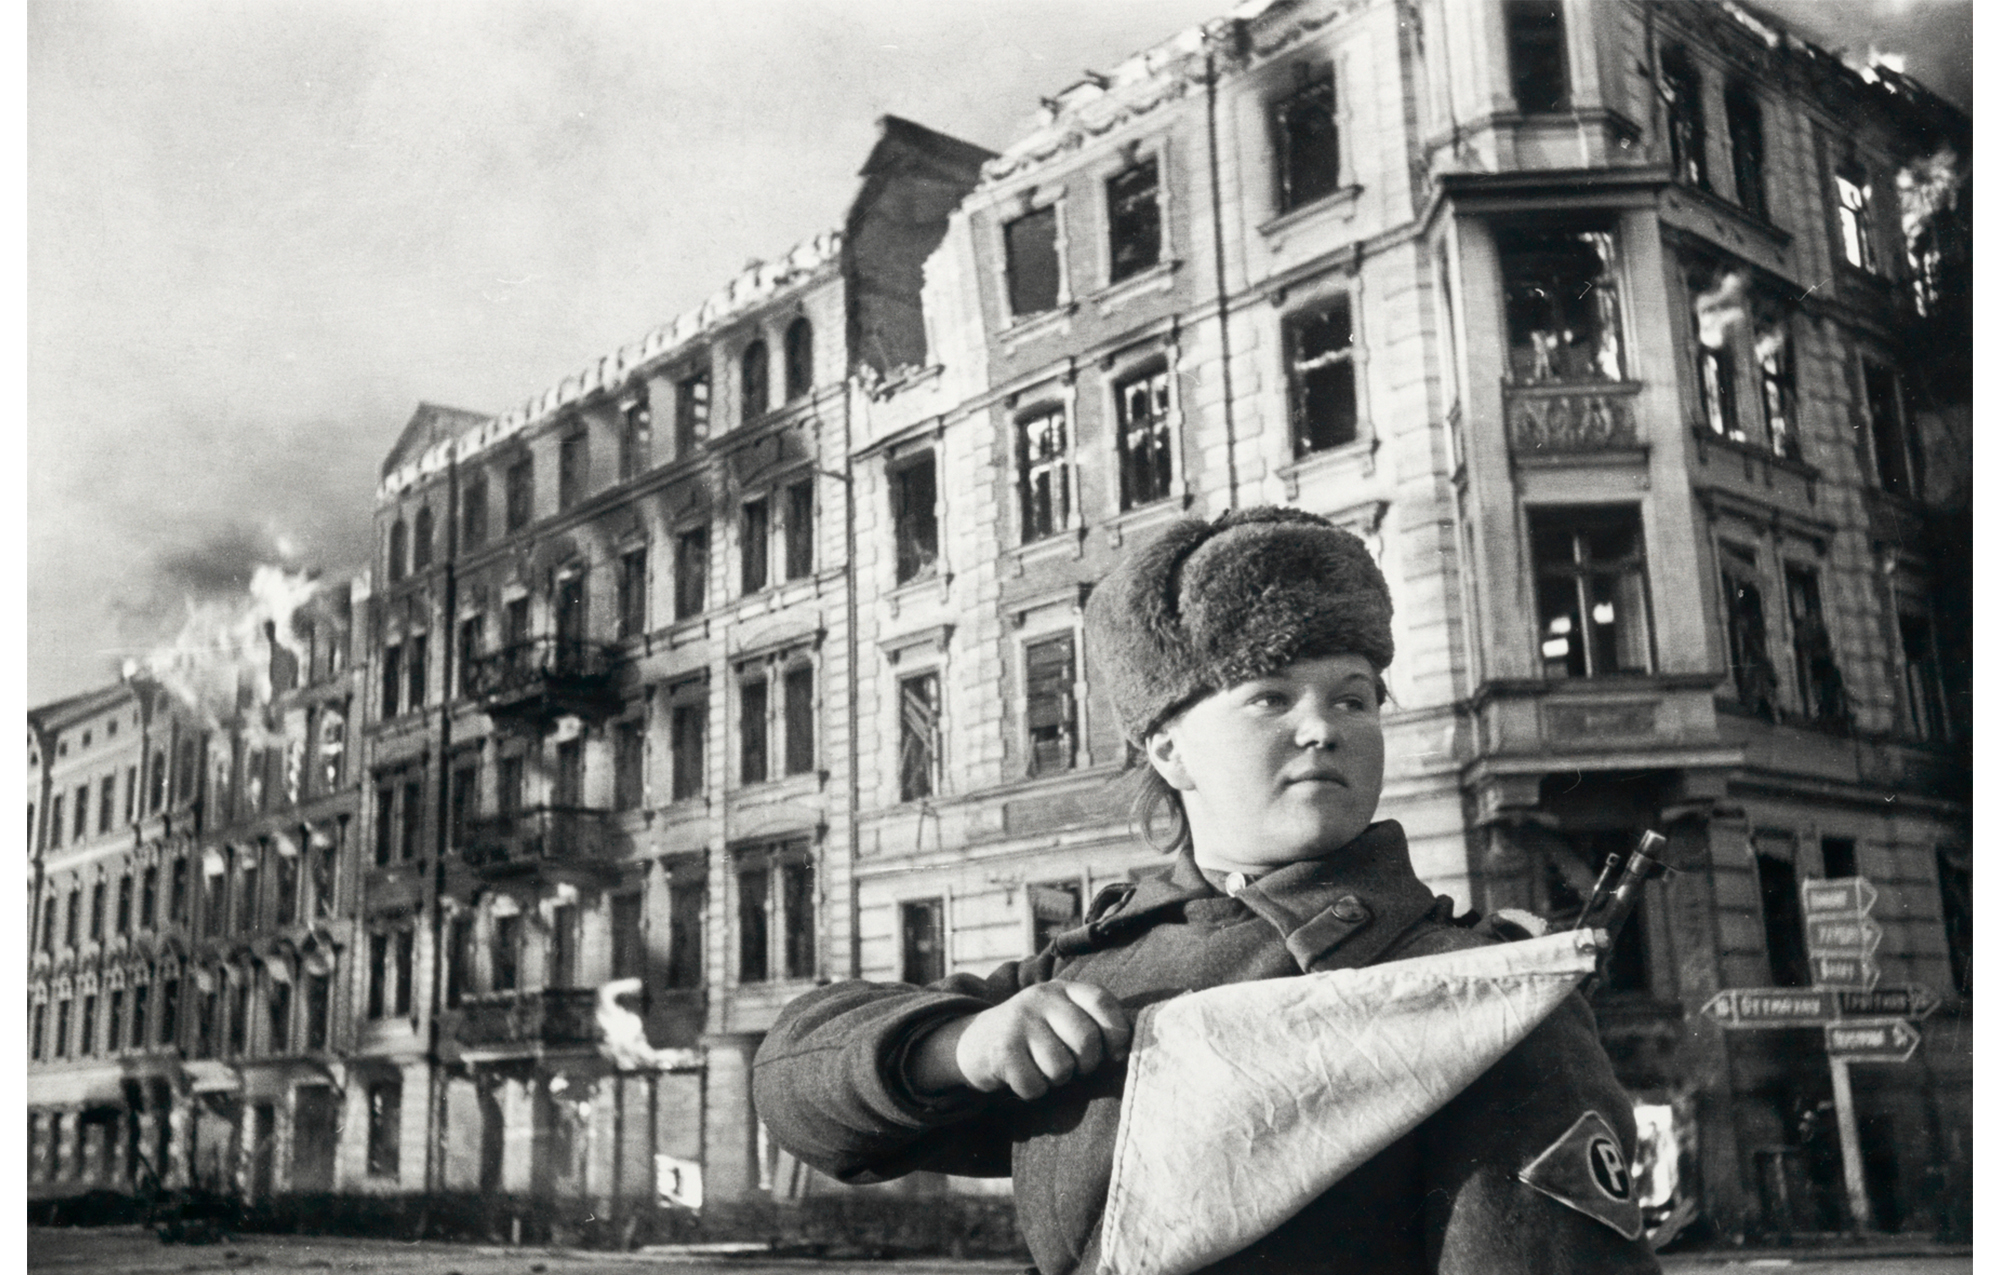 female soldier wearing fur cap stands in front of a large building whose edge appears to have caught on fire